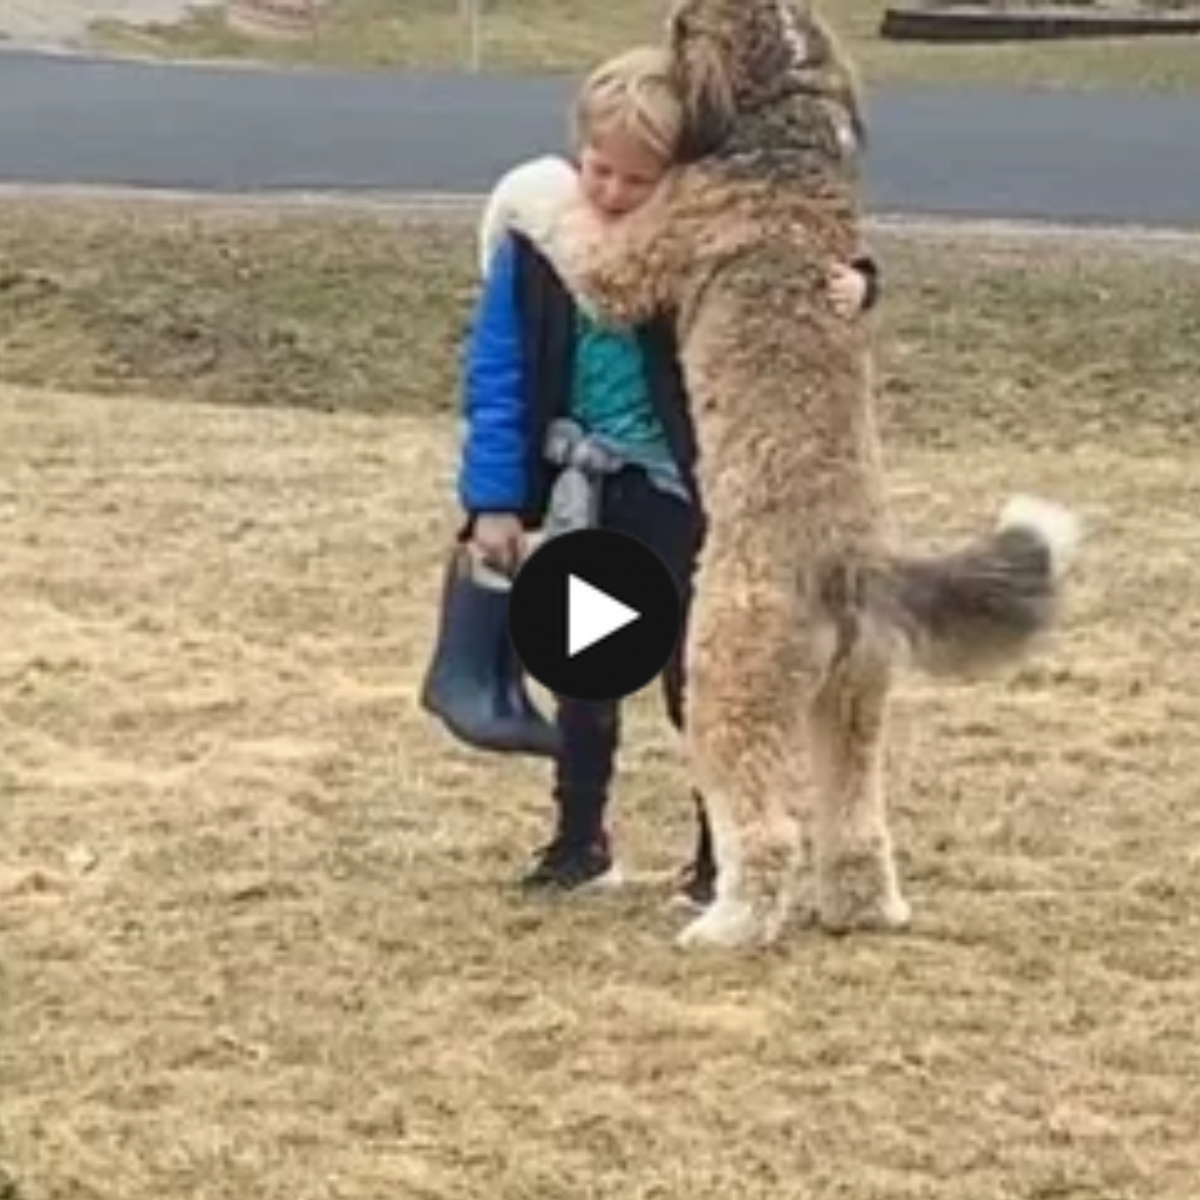 Loving dog Arya hikes more than 12 km every day to see her 10-year-old companion, and their heartwarming daily reunions have touched hearts all over the internet.